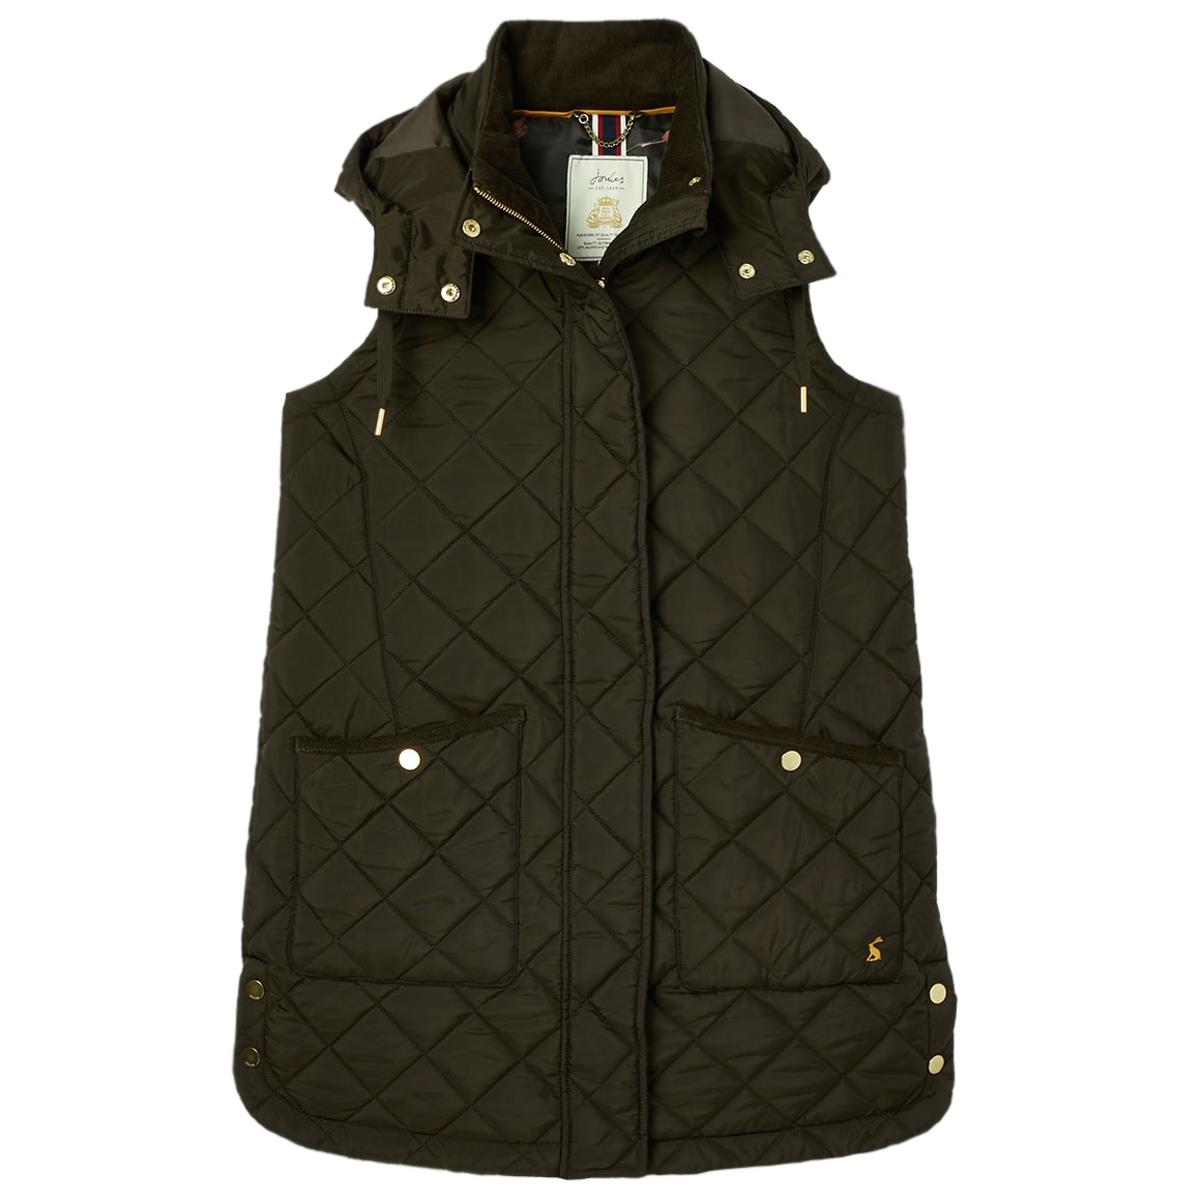 How does the Joules Chatham Gilet fasten?